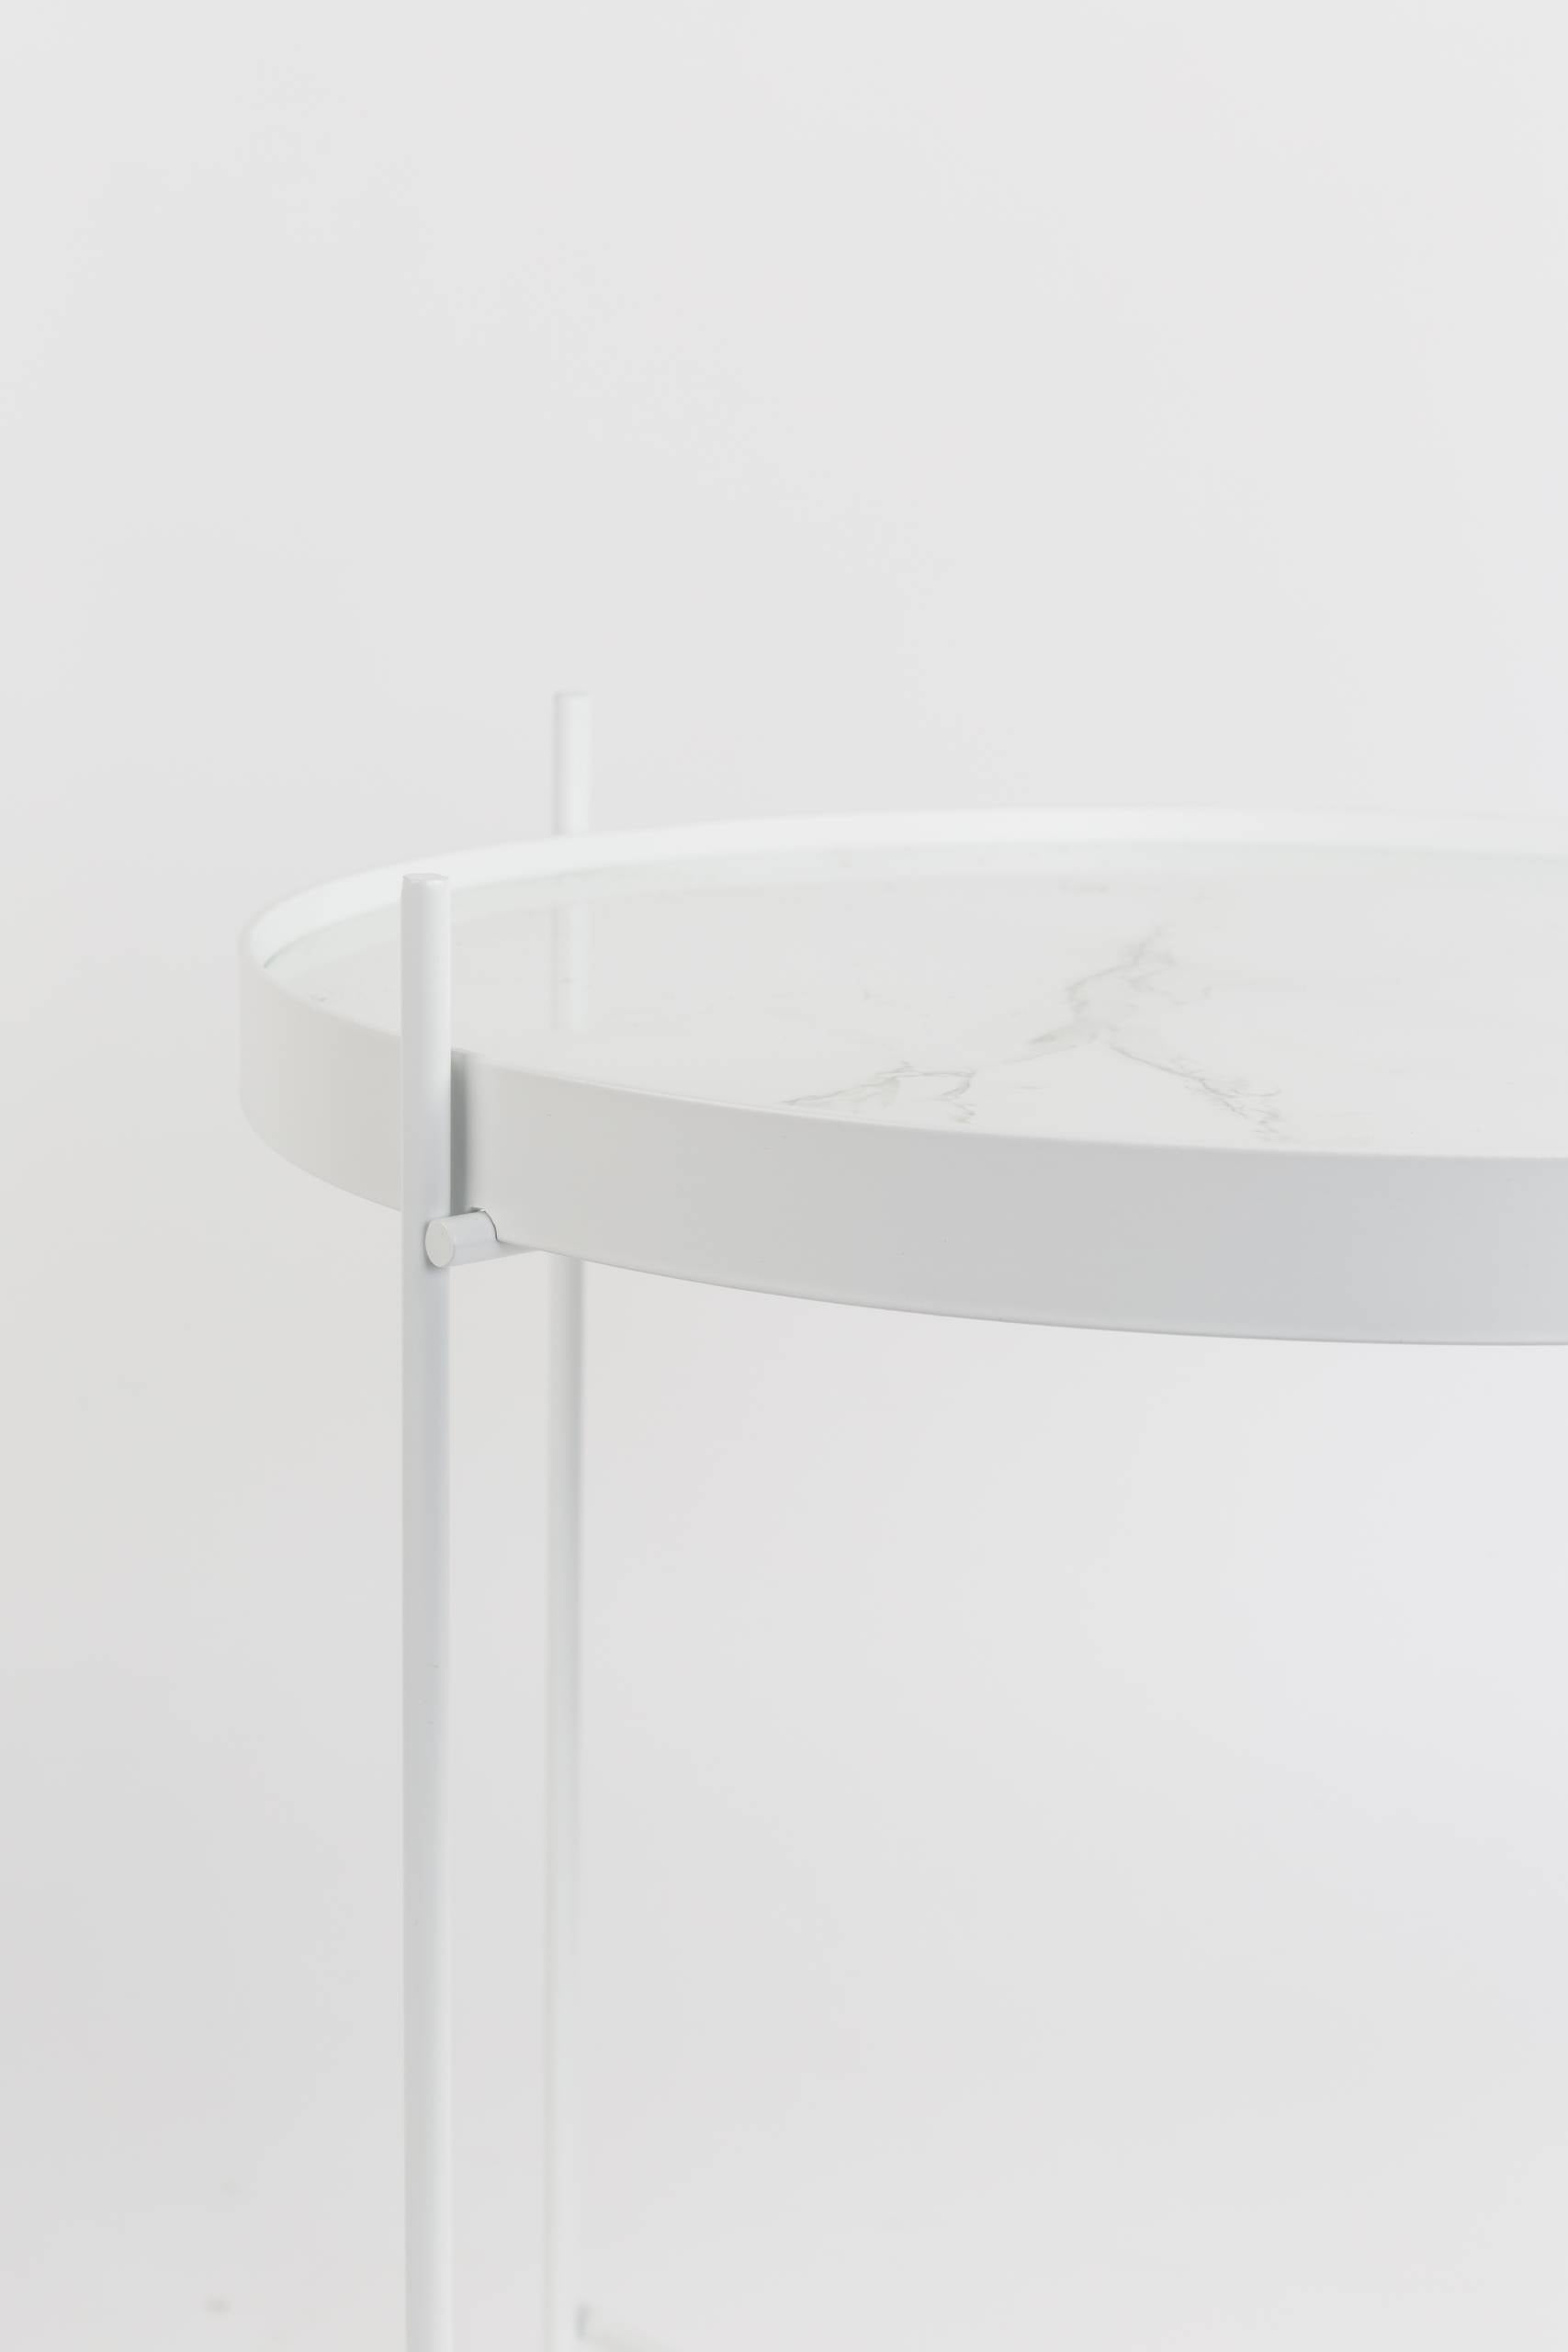 Zuiver | SIDE TABLE CUPID MARBLE WHITE Default Title